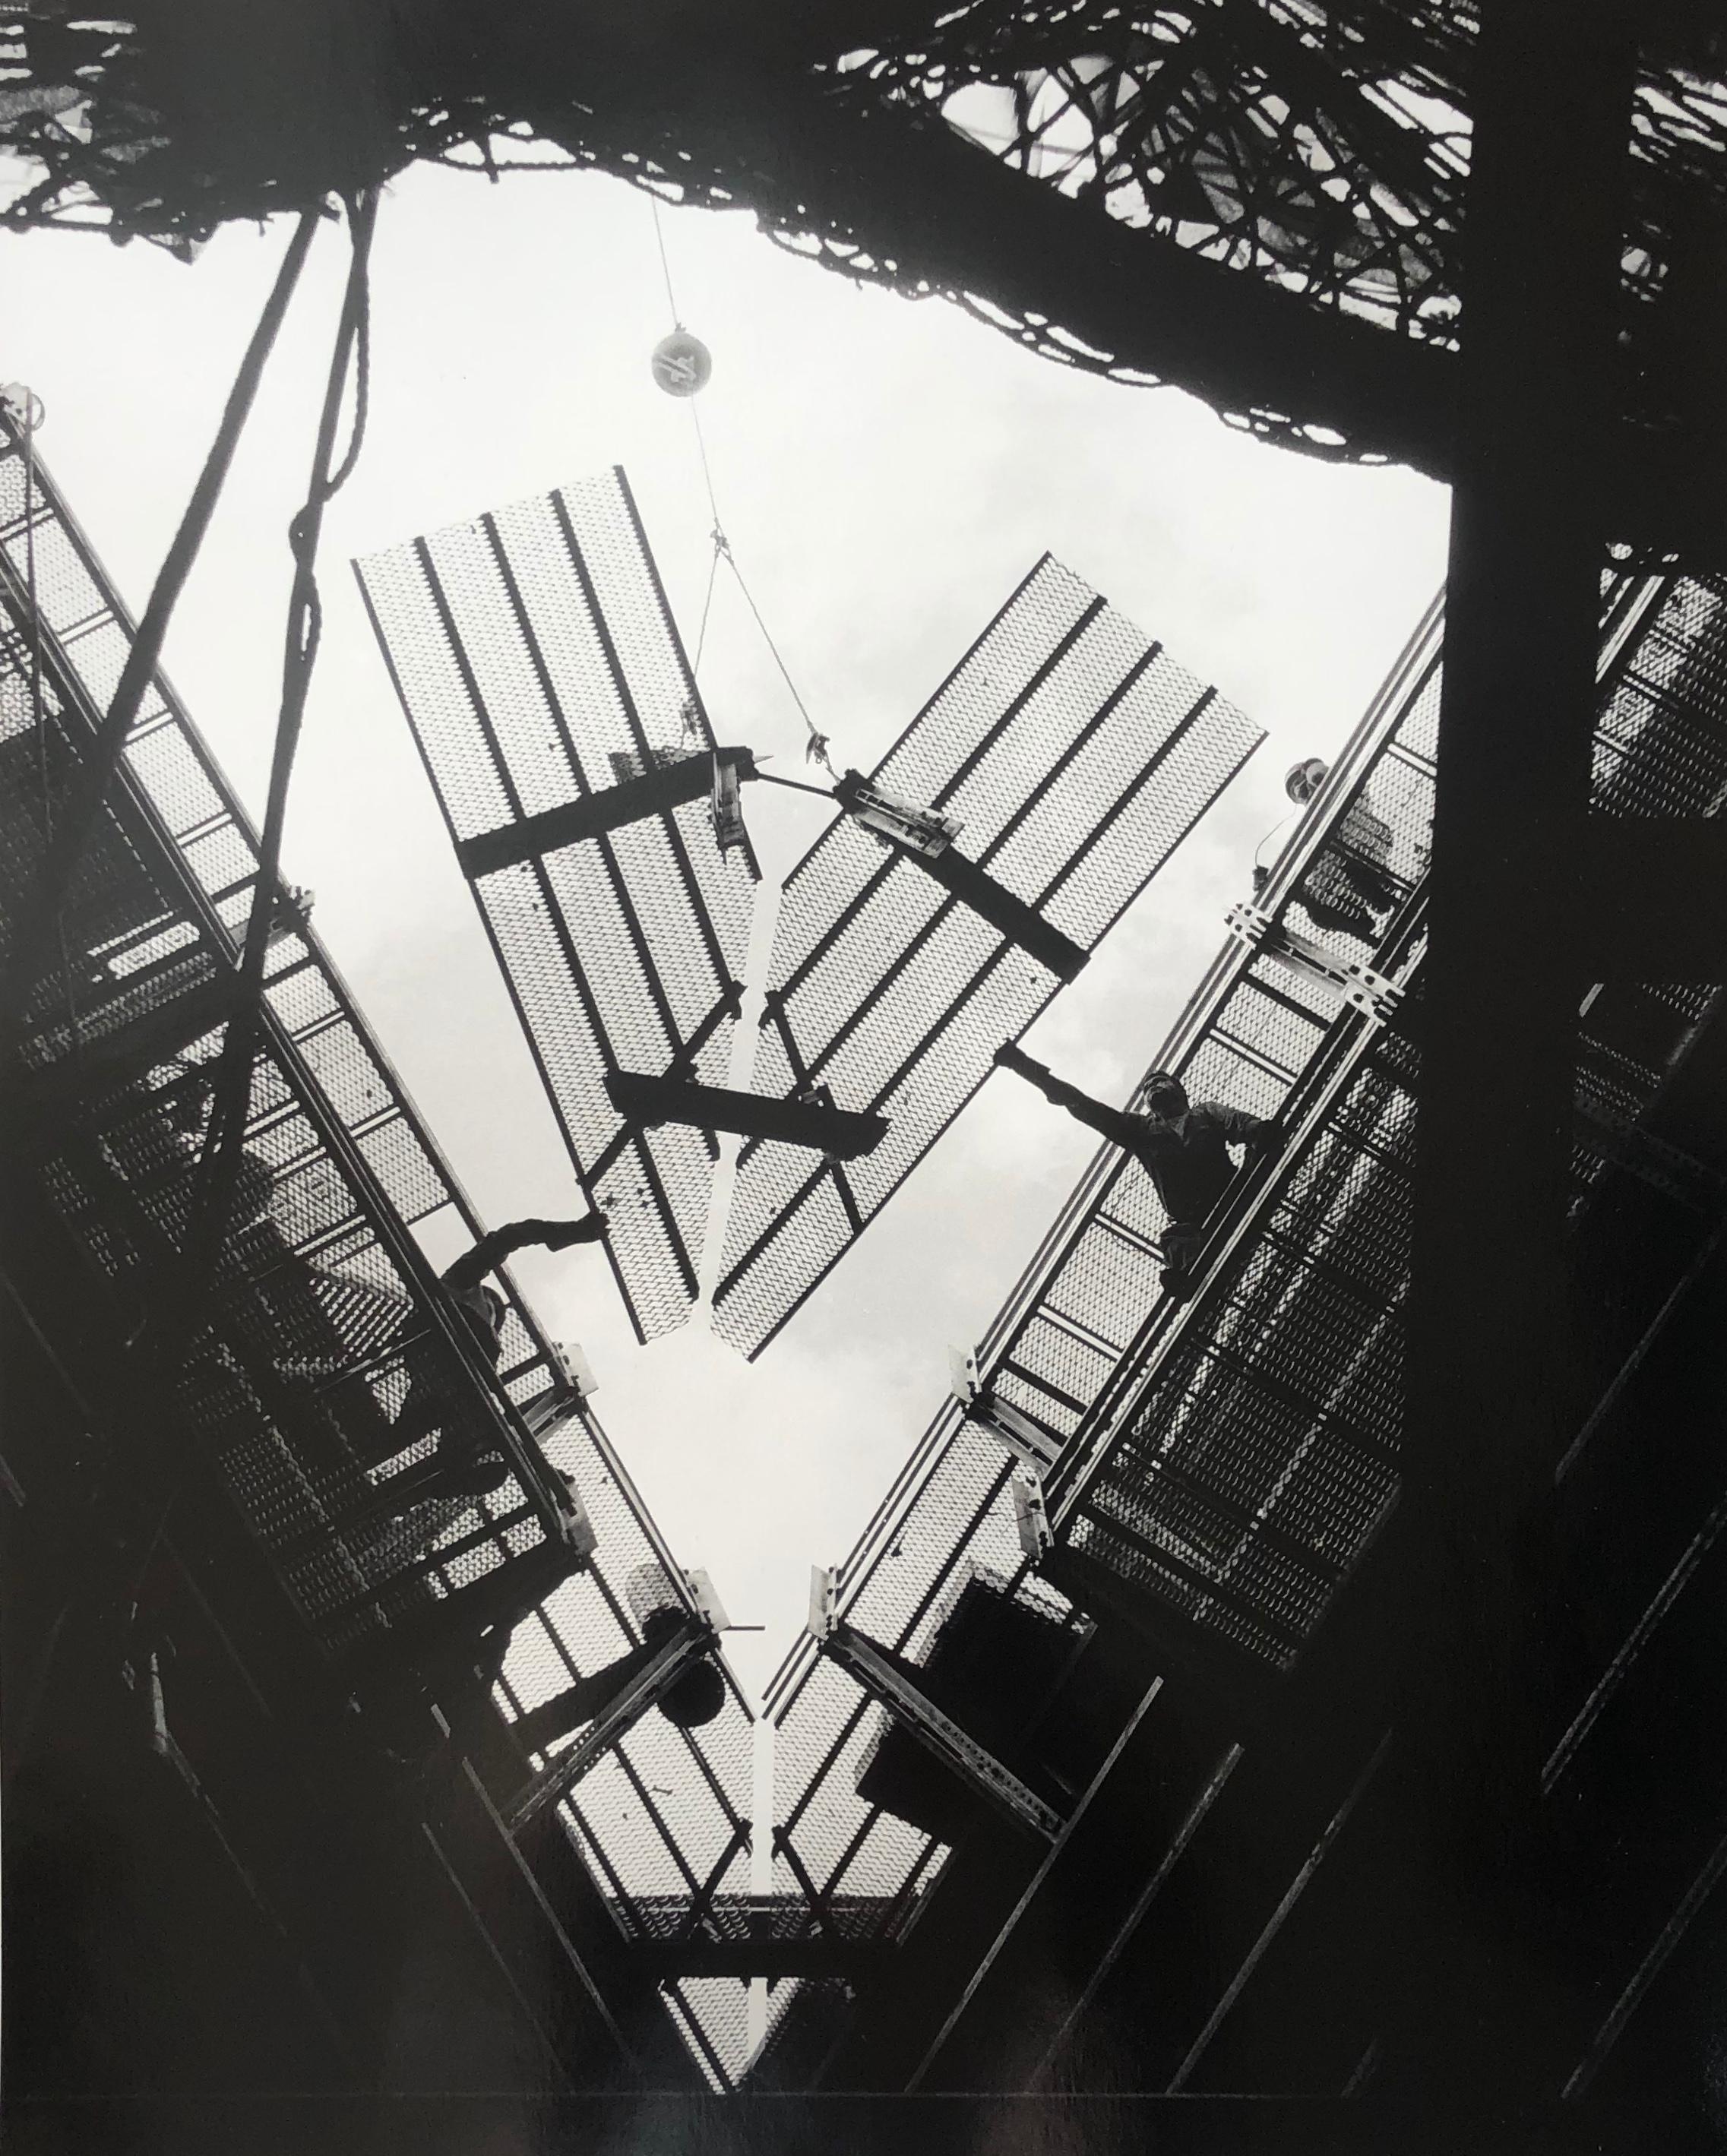 Art Shay Abstract Photograph - Building of the St. Louis Gateway Arch, 1963, Silver Gelatin Print